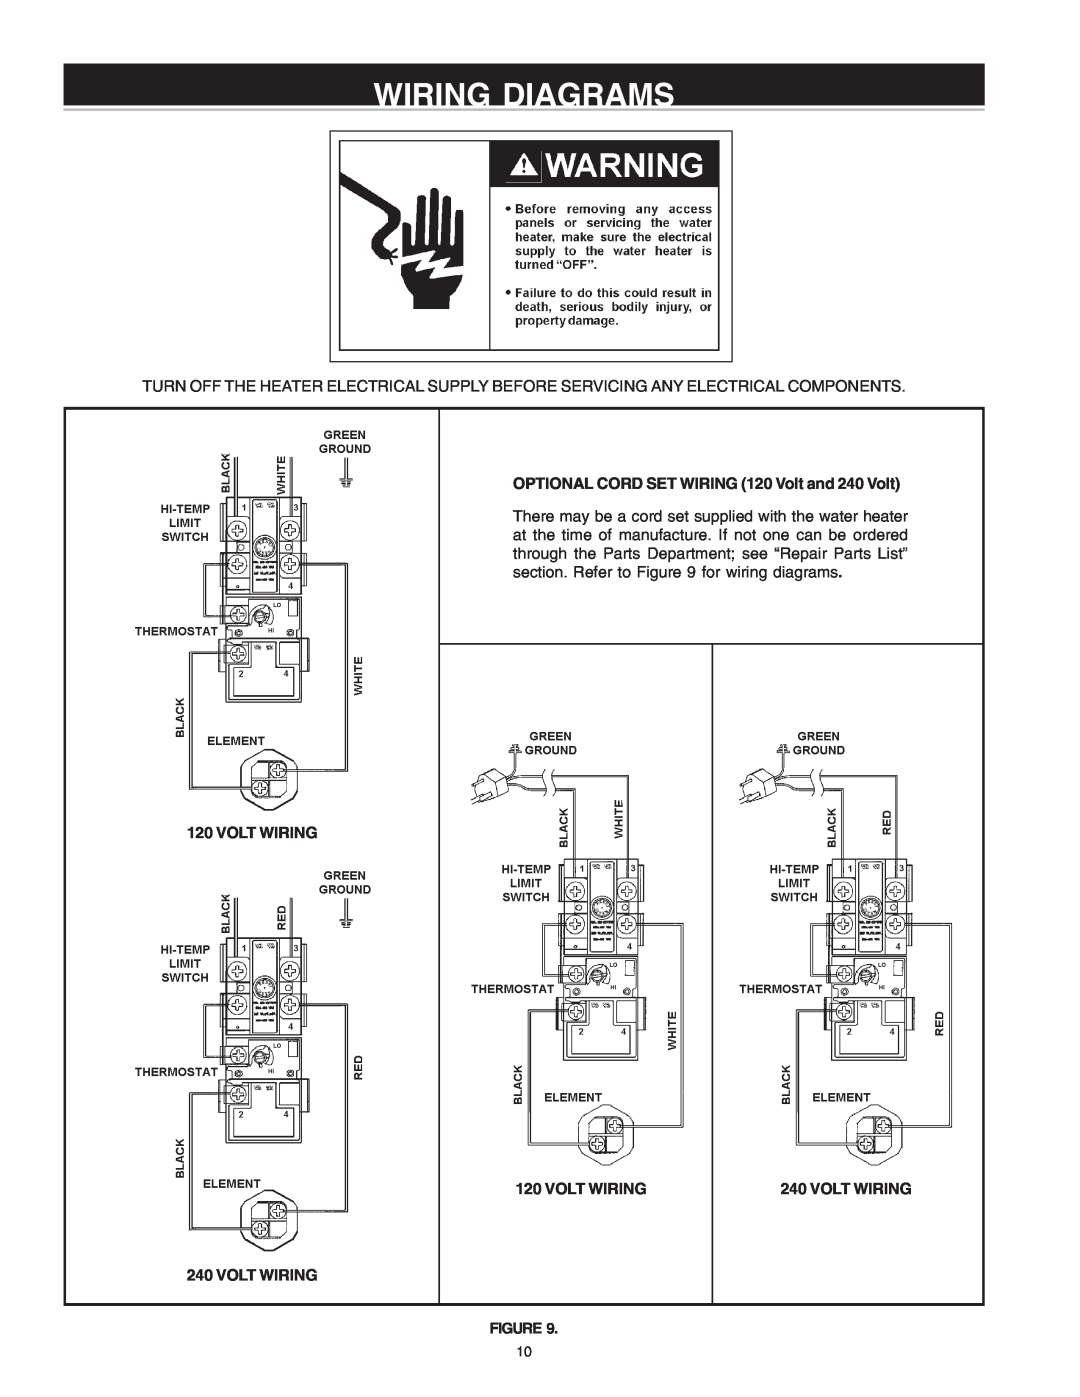 Reliance Water Heaters 184735-000 Wiring Diagrams, OPTIONAL CORD SET WIRING 120 Volt and 240 Volt, Volt Wiring 